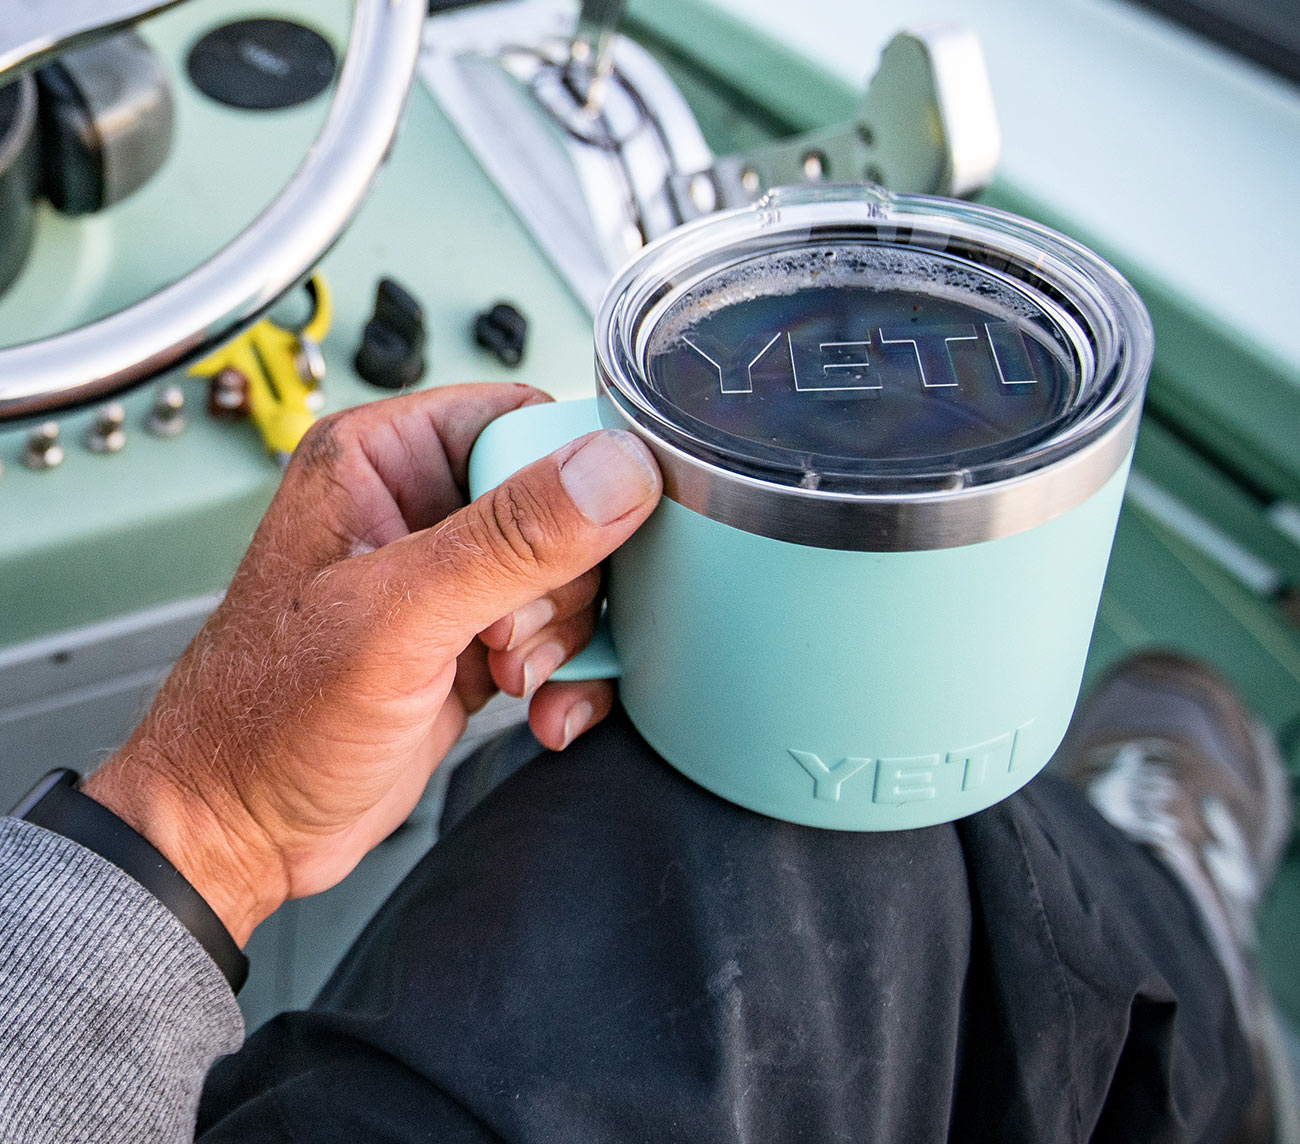 The YETI Rambler 14 oz. vacuum-insulated mug. ($25, available in a bunch of Duracoat colors)